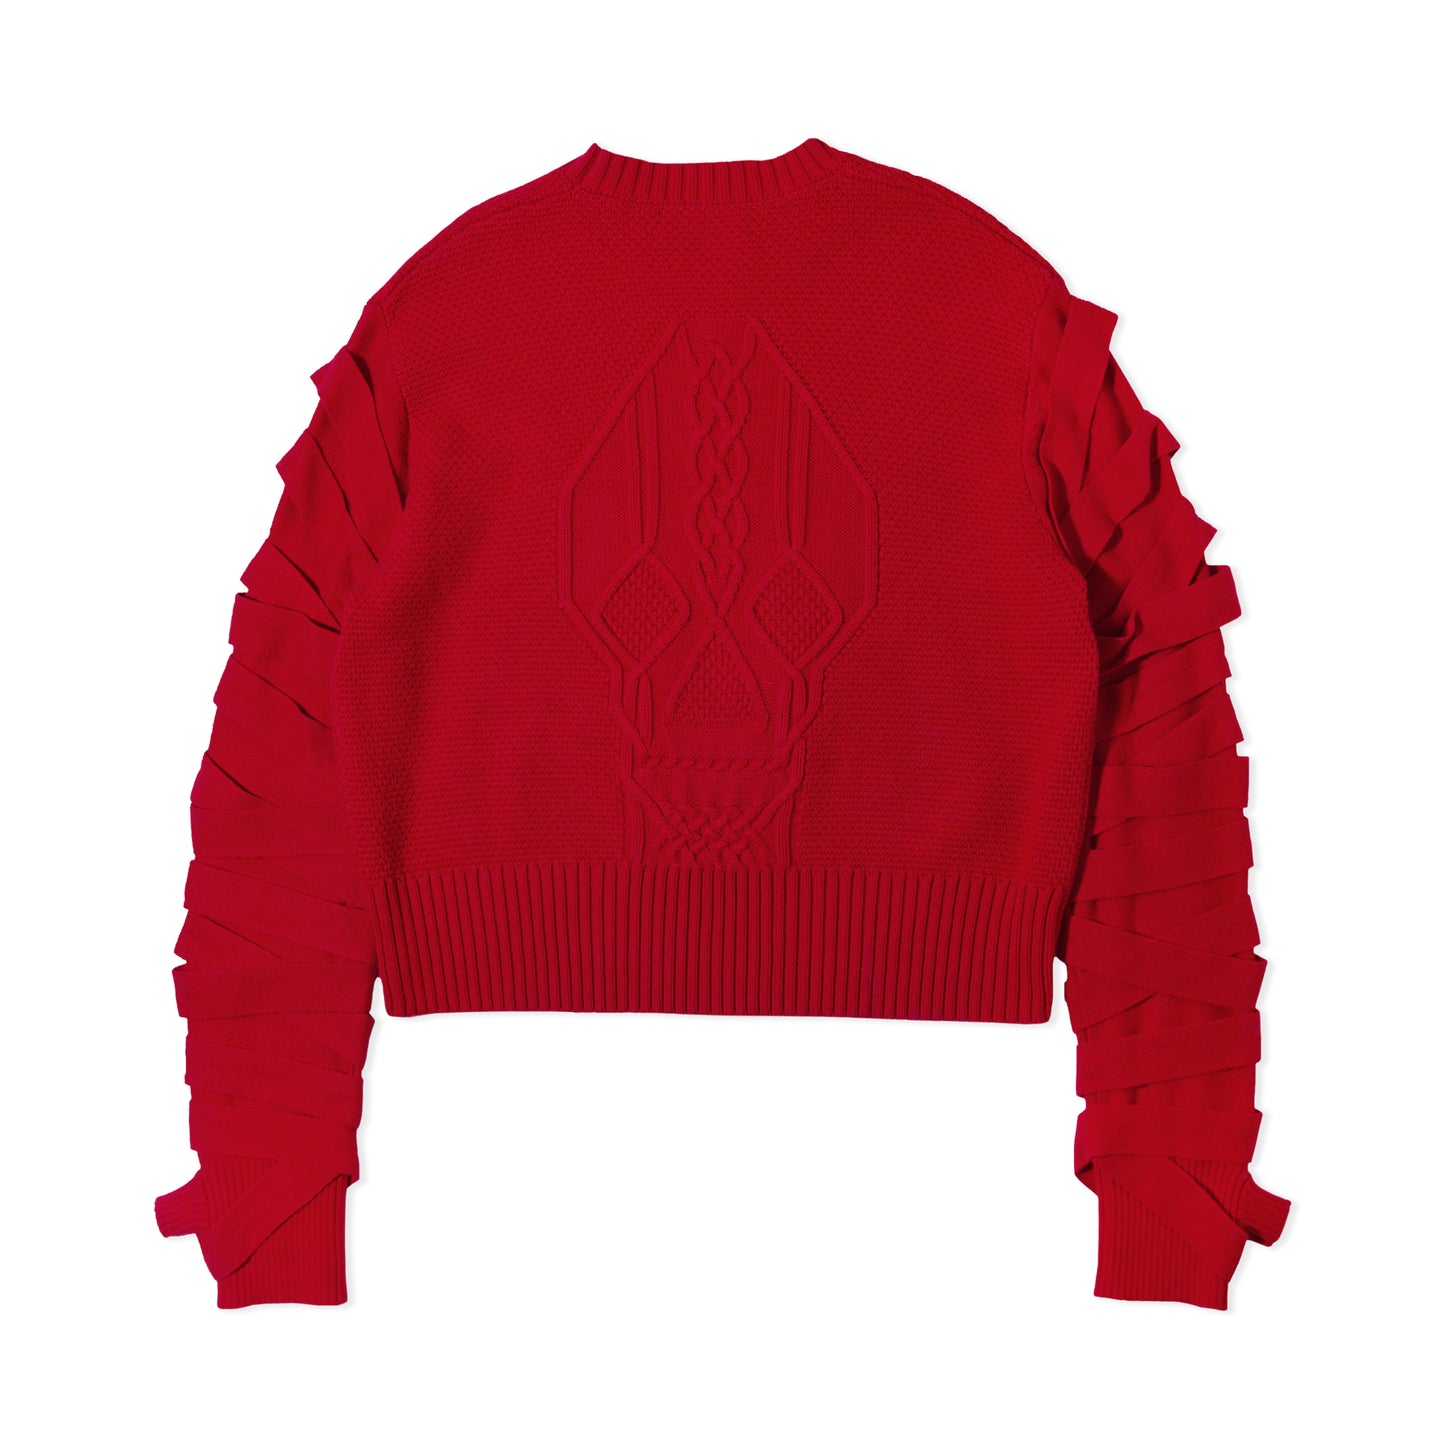 AMA Skeletal Bondage Cable Knit Sweater Red